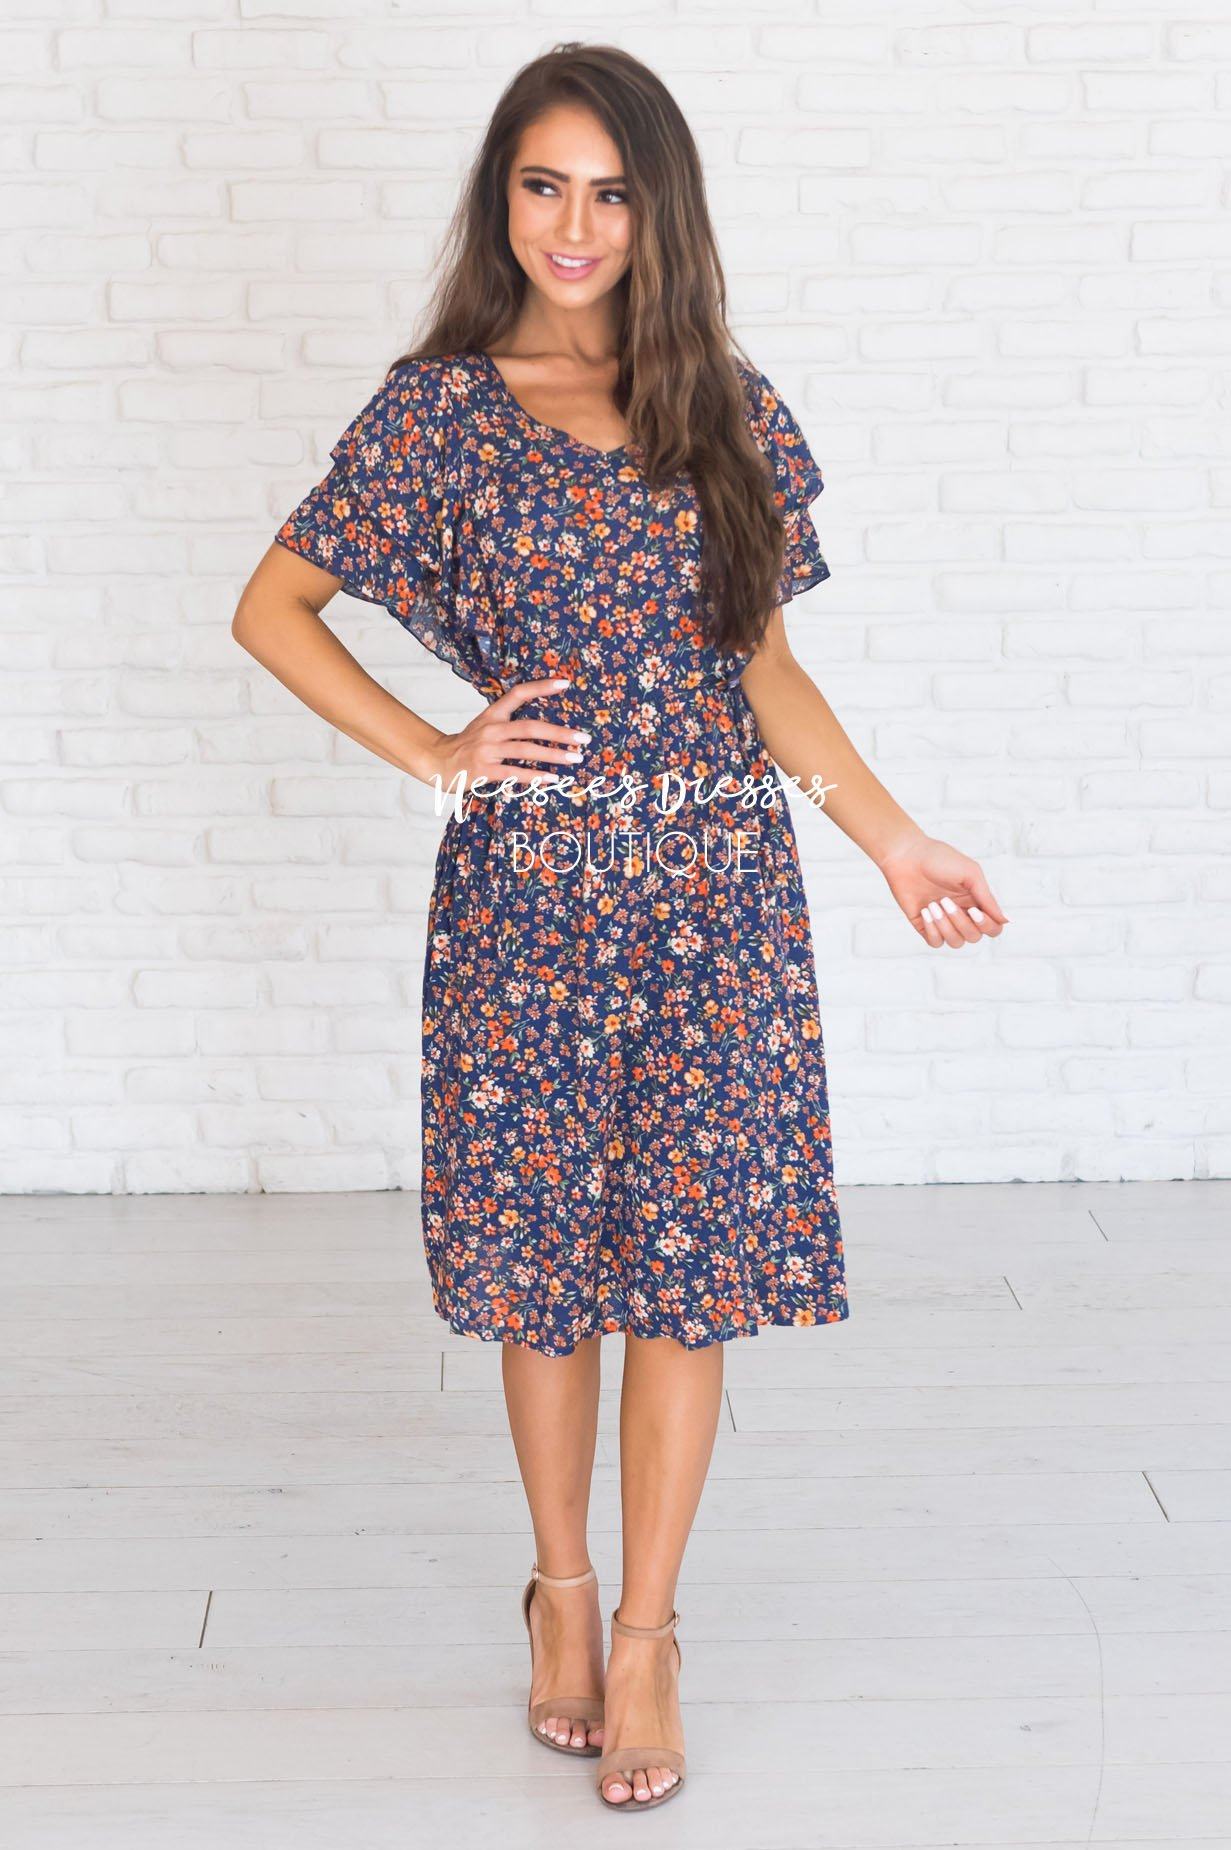 The Rhianne Modest Floral Dress - NeeSee's Dresses